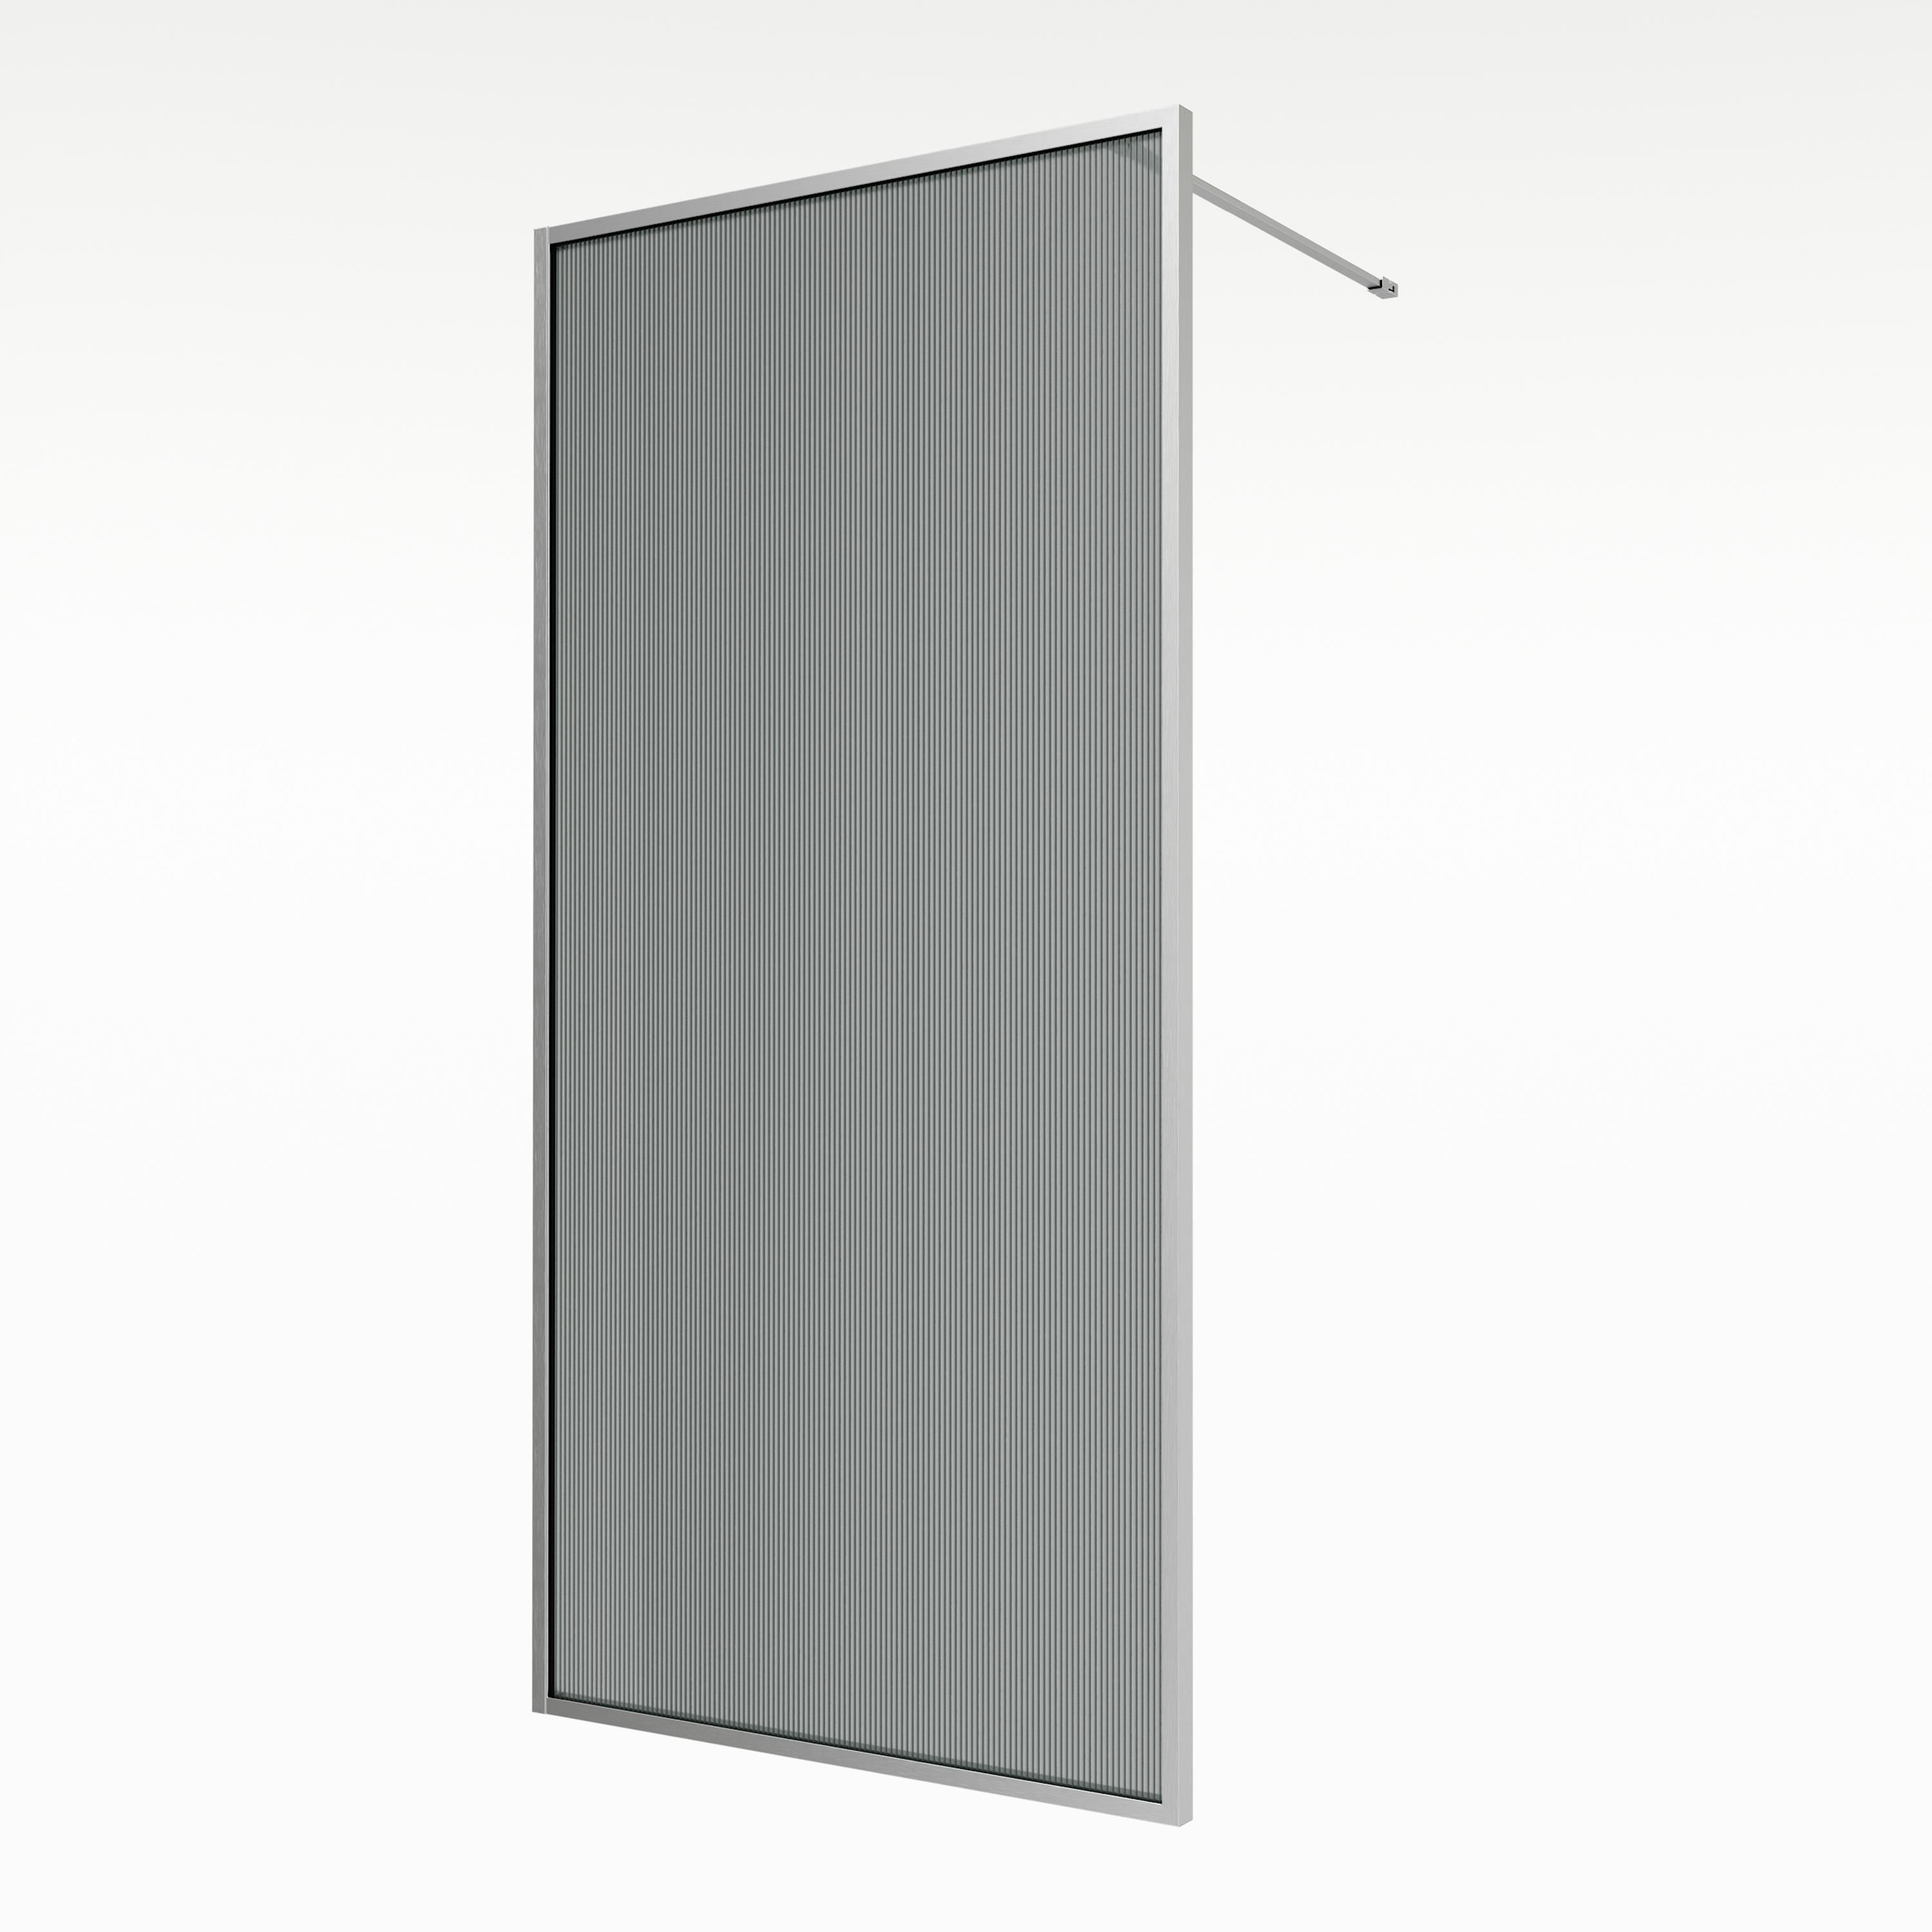 Aqualux AQ PRO Polished Silver Fluted Single Wet room glass screen (H)200cm (W)100cm